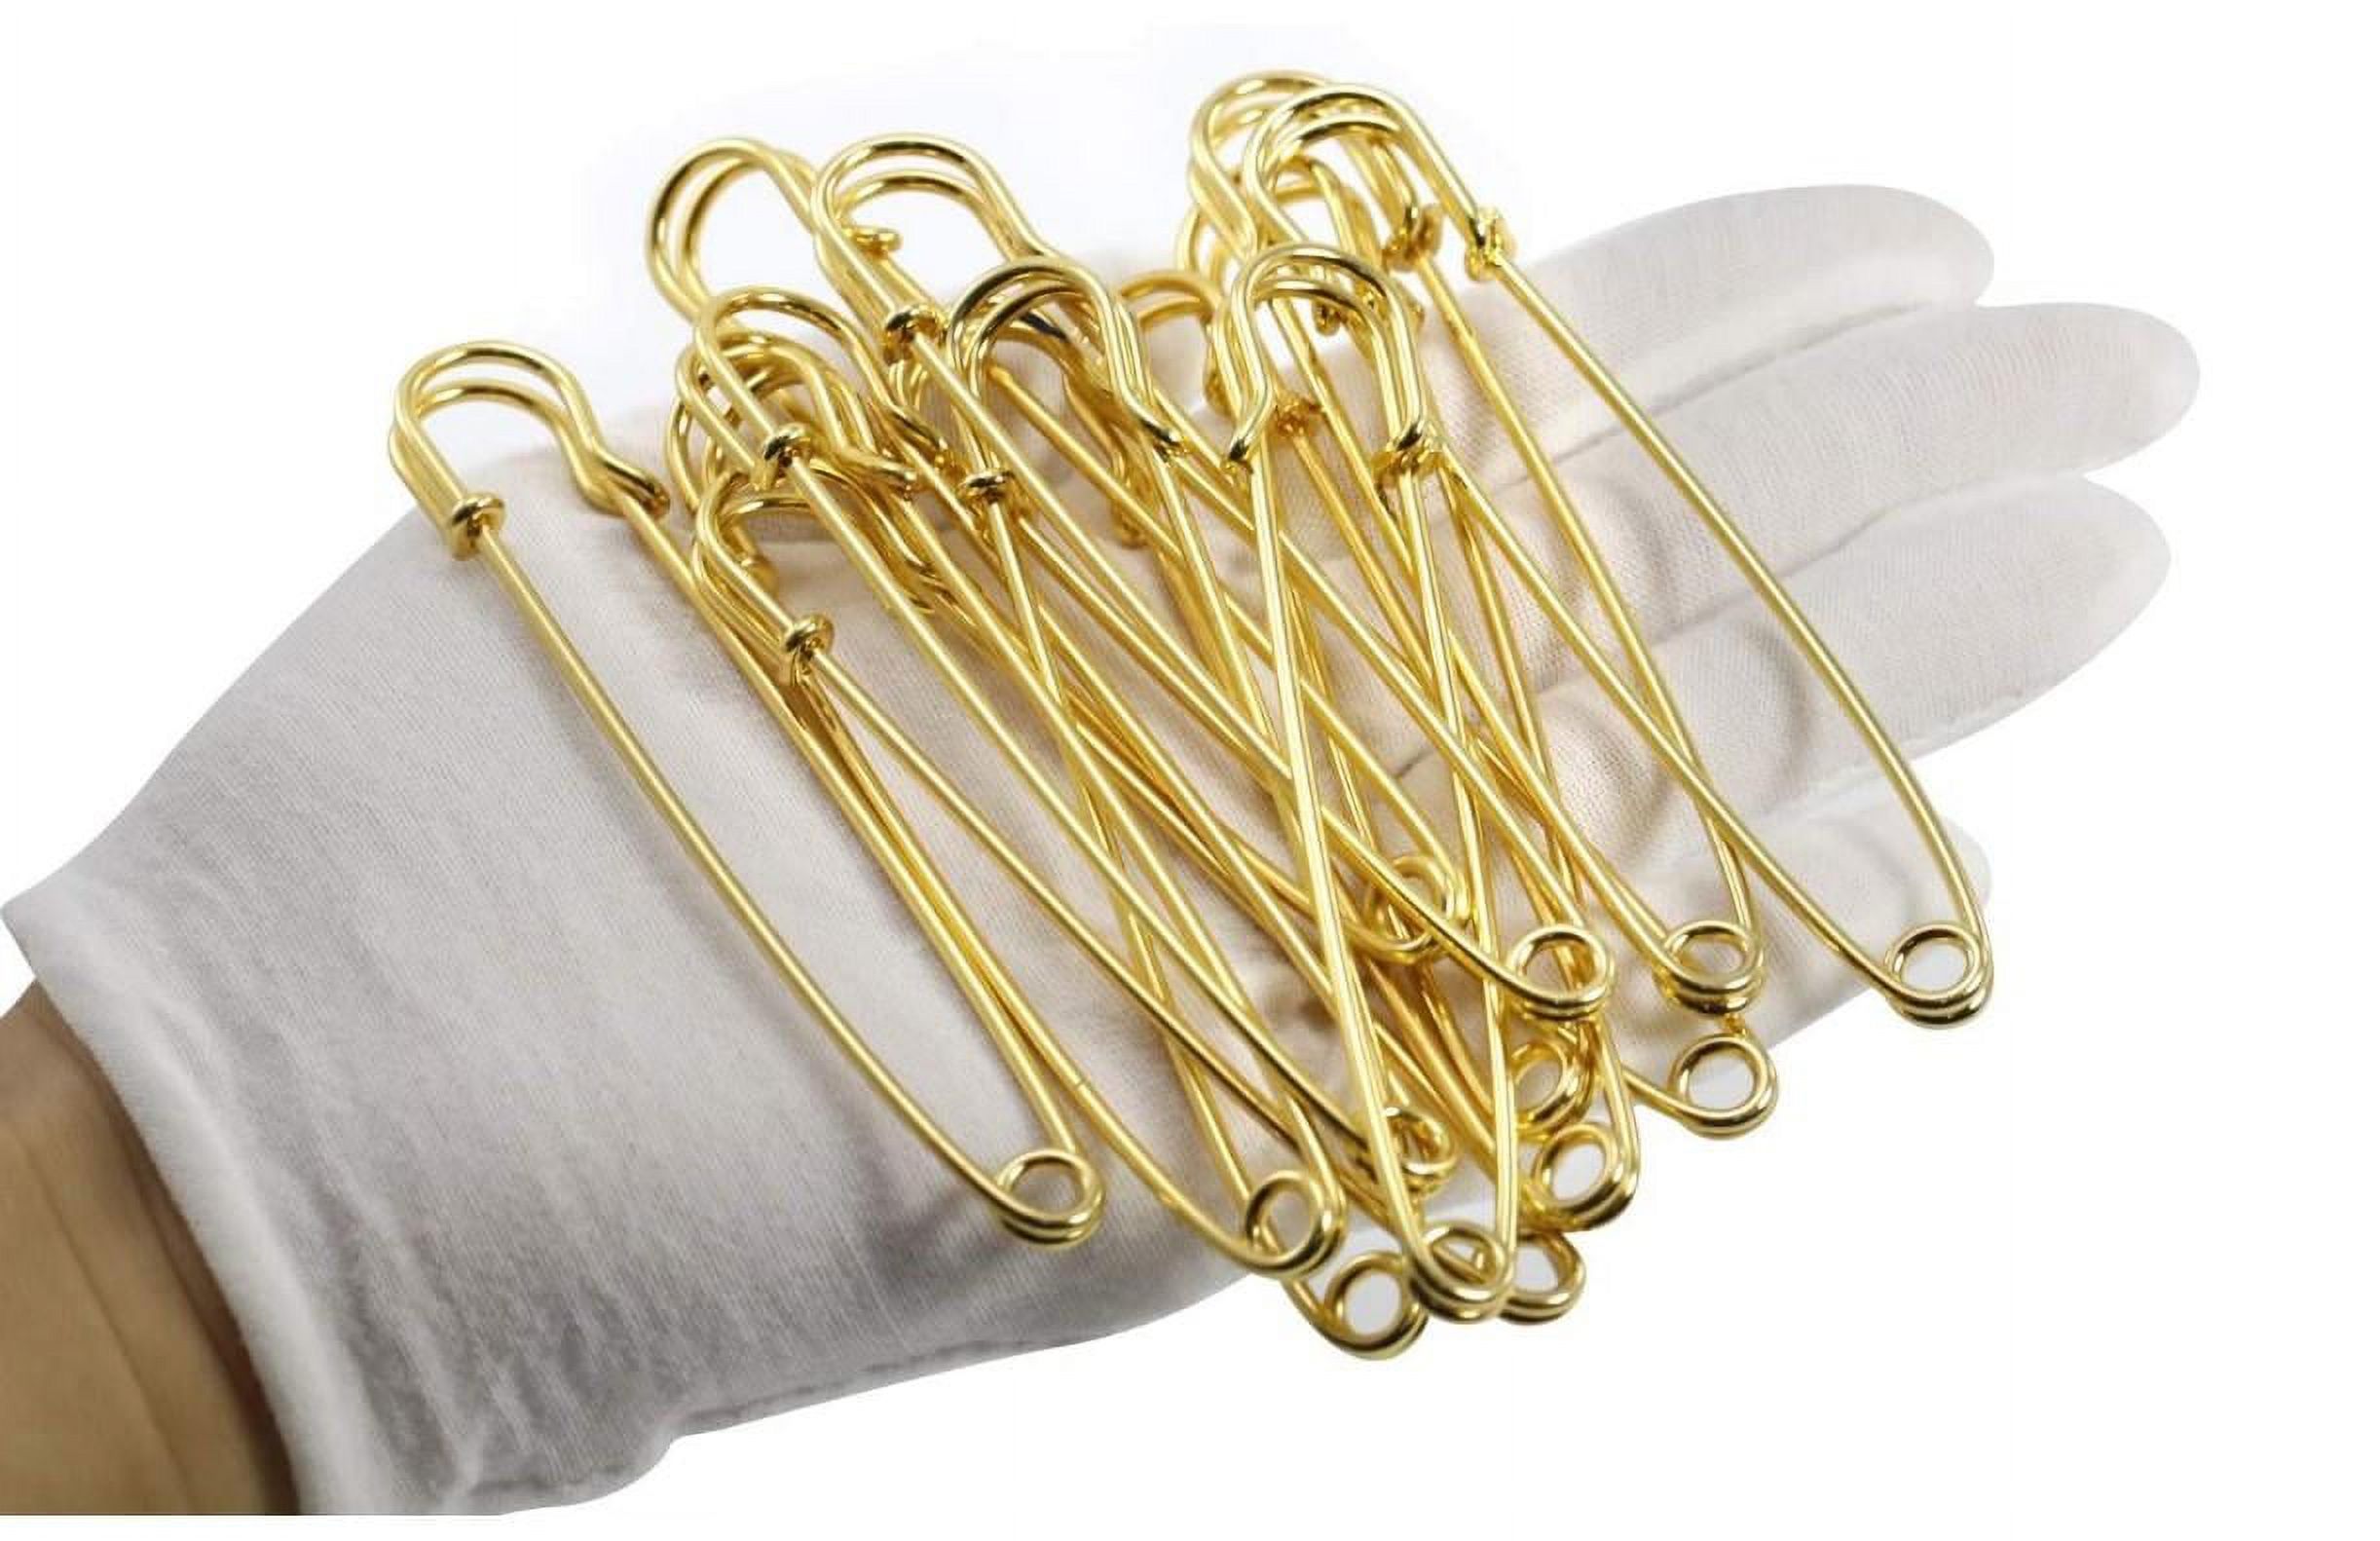 40 PiecesExtra Large Safety Pins Steel Blanket Pins Bulk Gold Big Safety  Pins Giant Heavy Duty Safety Pins Decorative Safety Pins for DIY Crafts  Skirts Kilts Brooch Making 